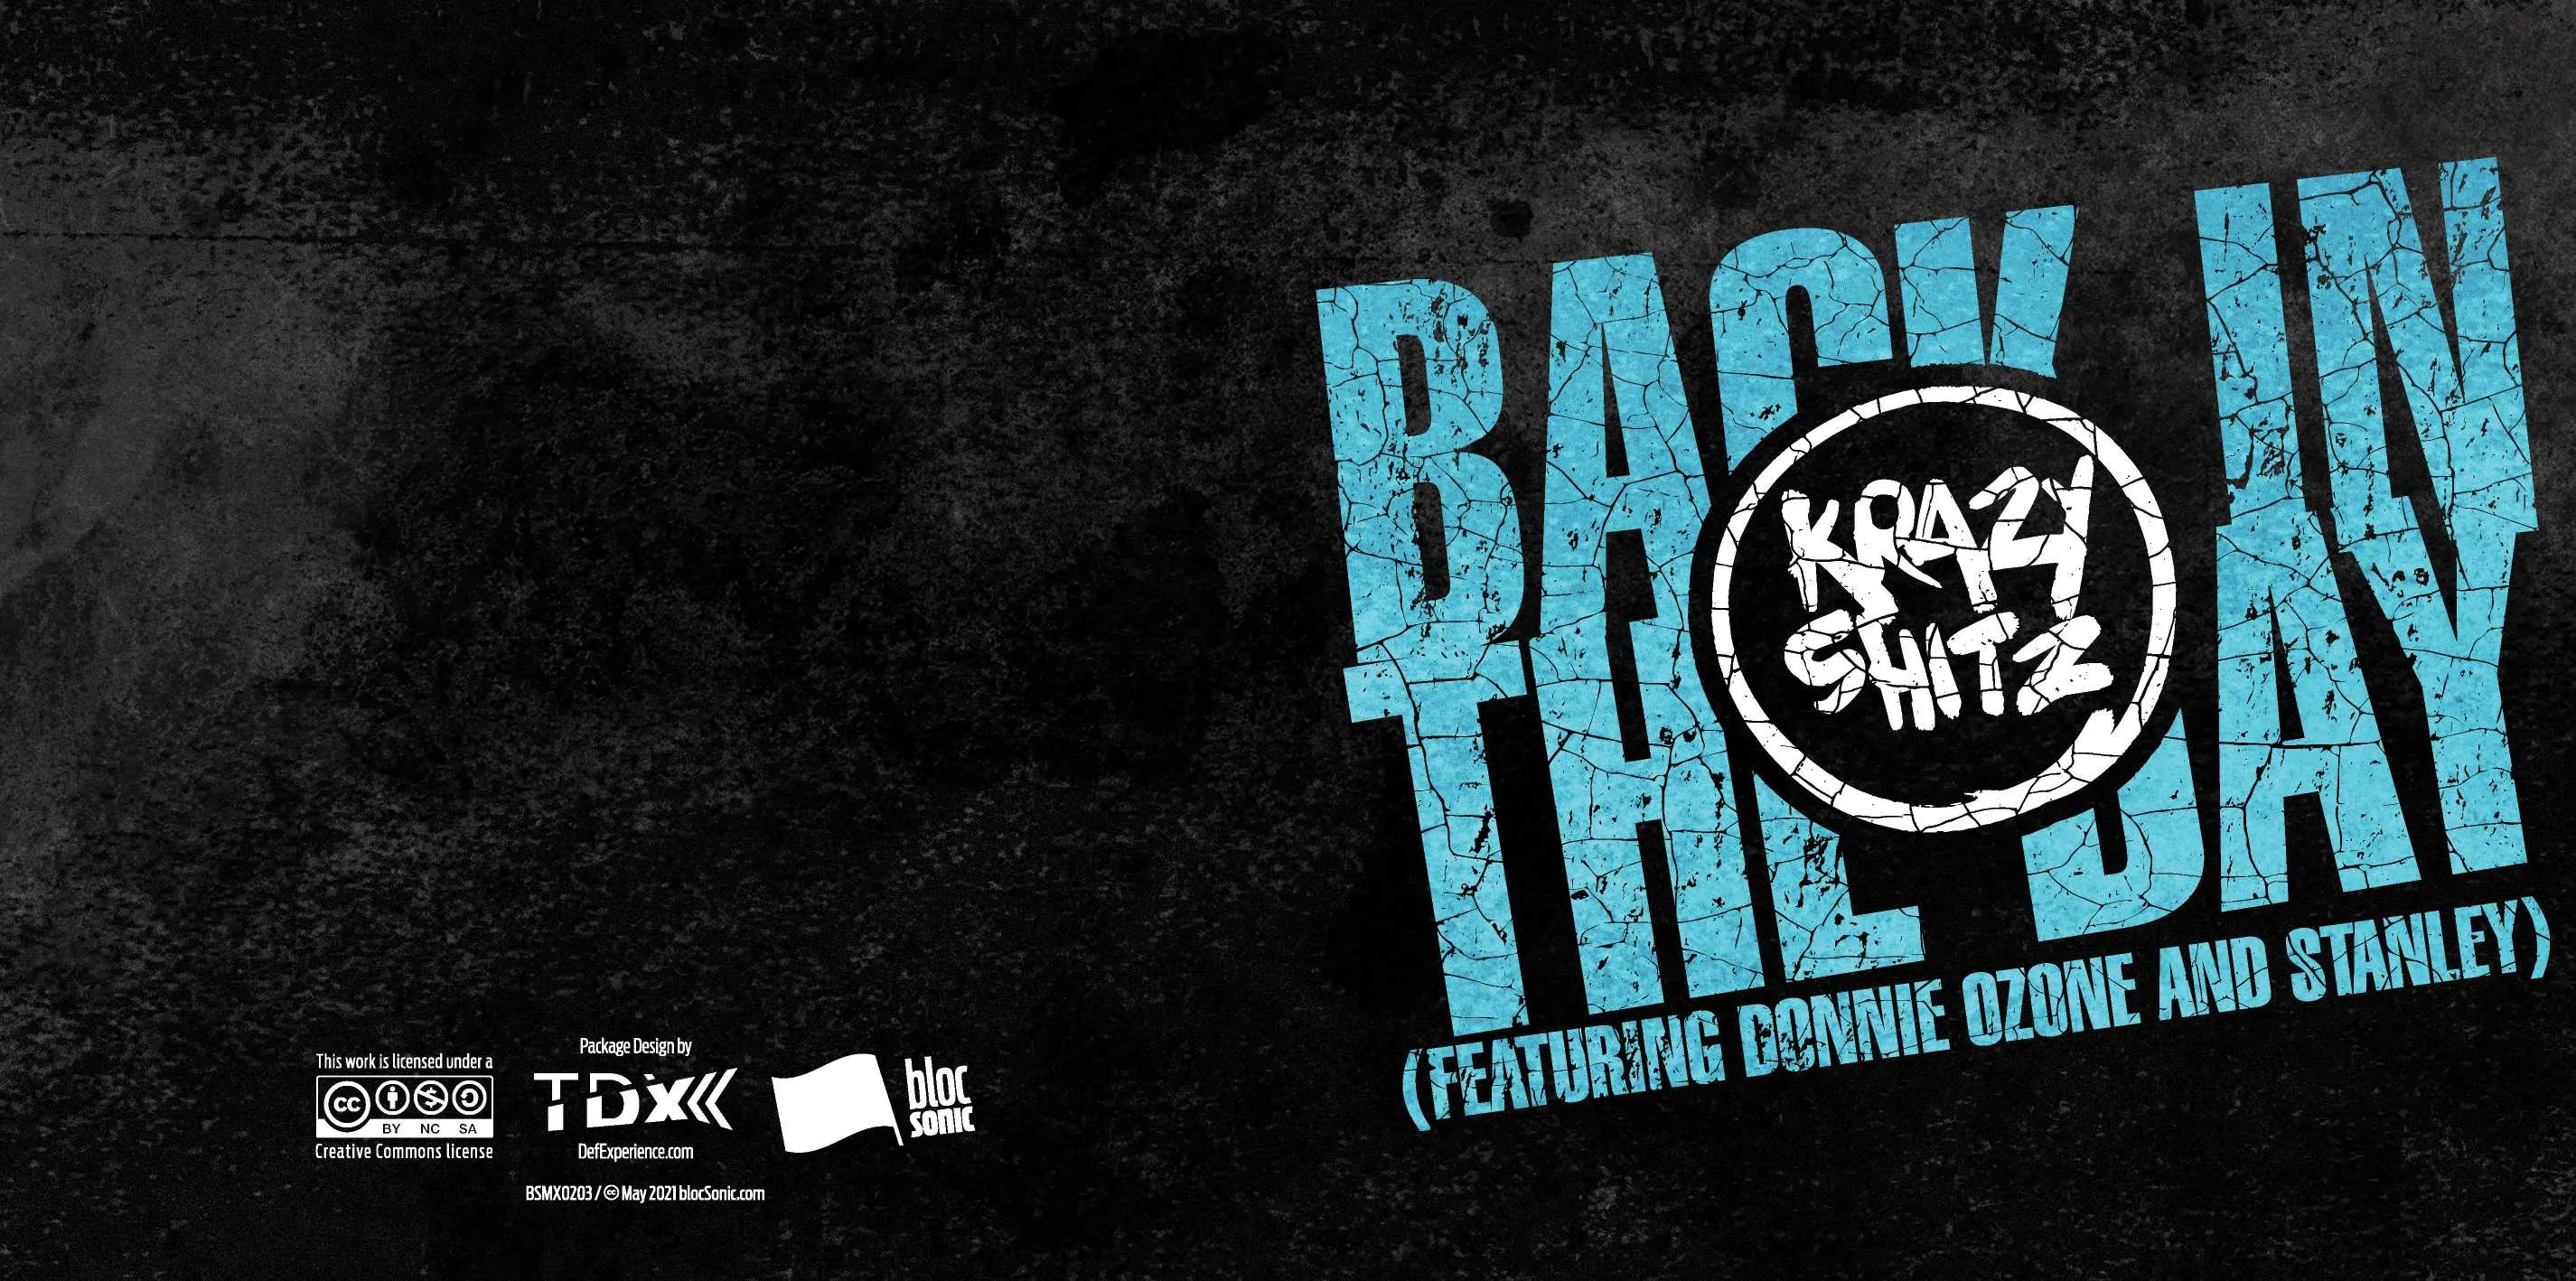 Album insert for “Back In The Day (Featuring Donnie Ozone and Stanley)” by Krazy Shitz